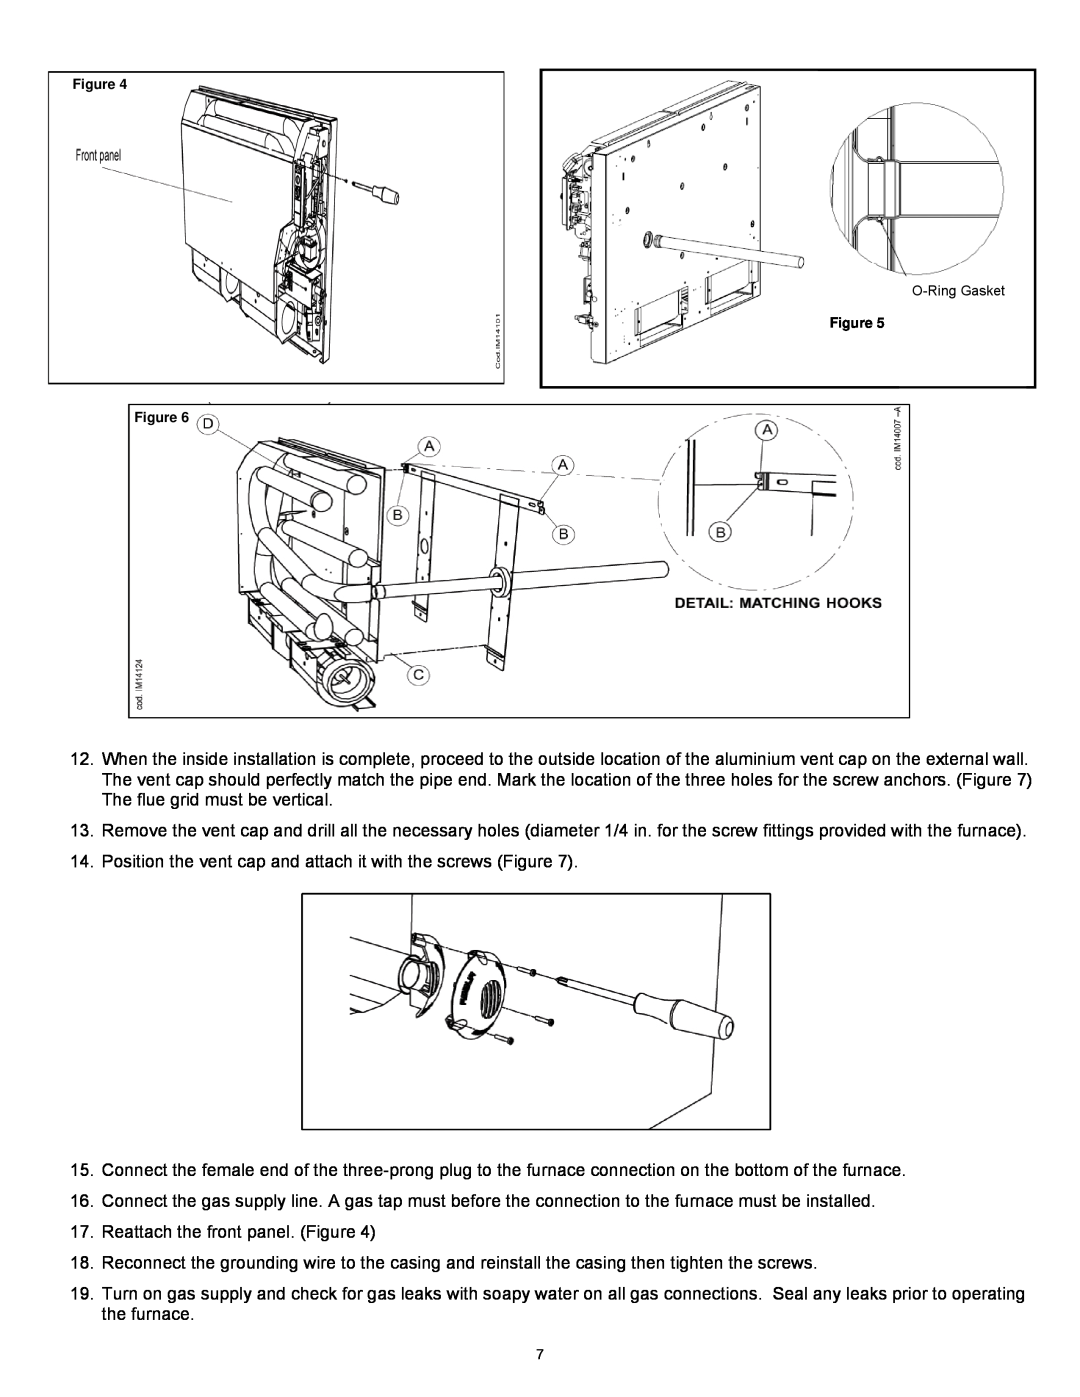 Williams 2903511, 2903512 installation instructions Reattach the front panel. Figure 